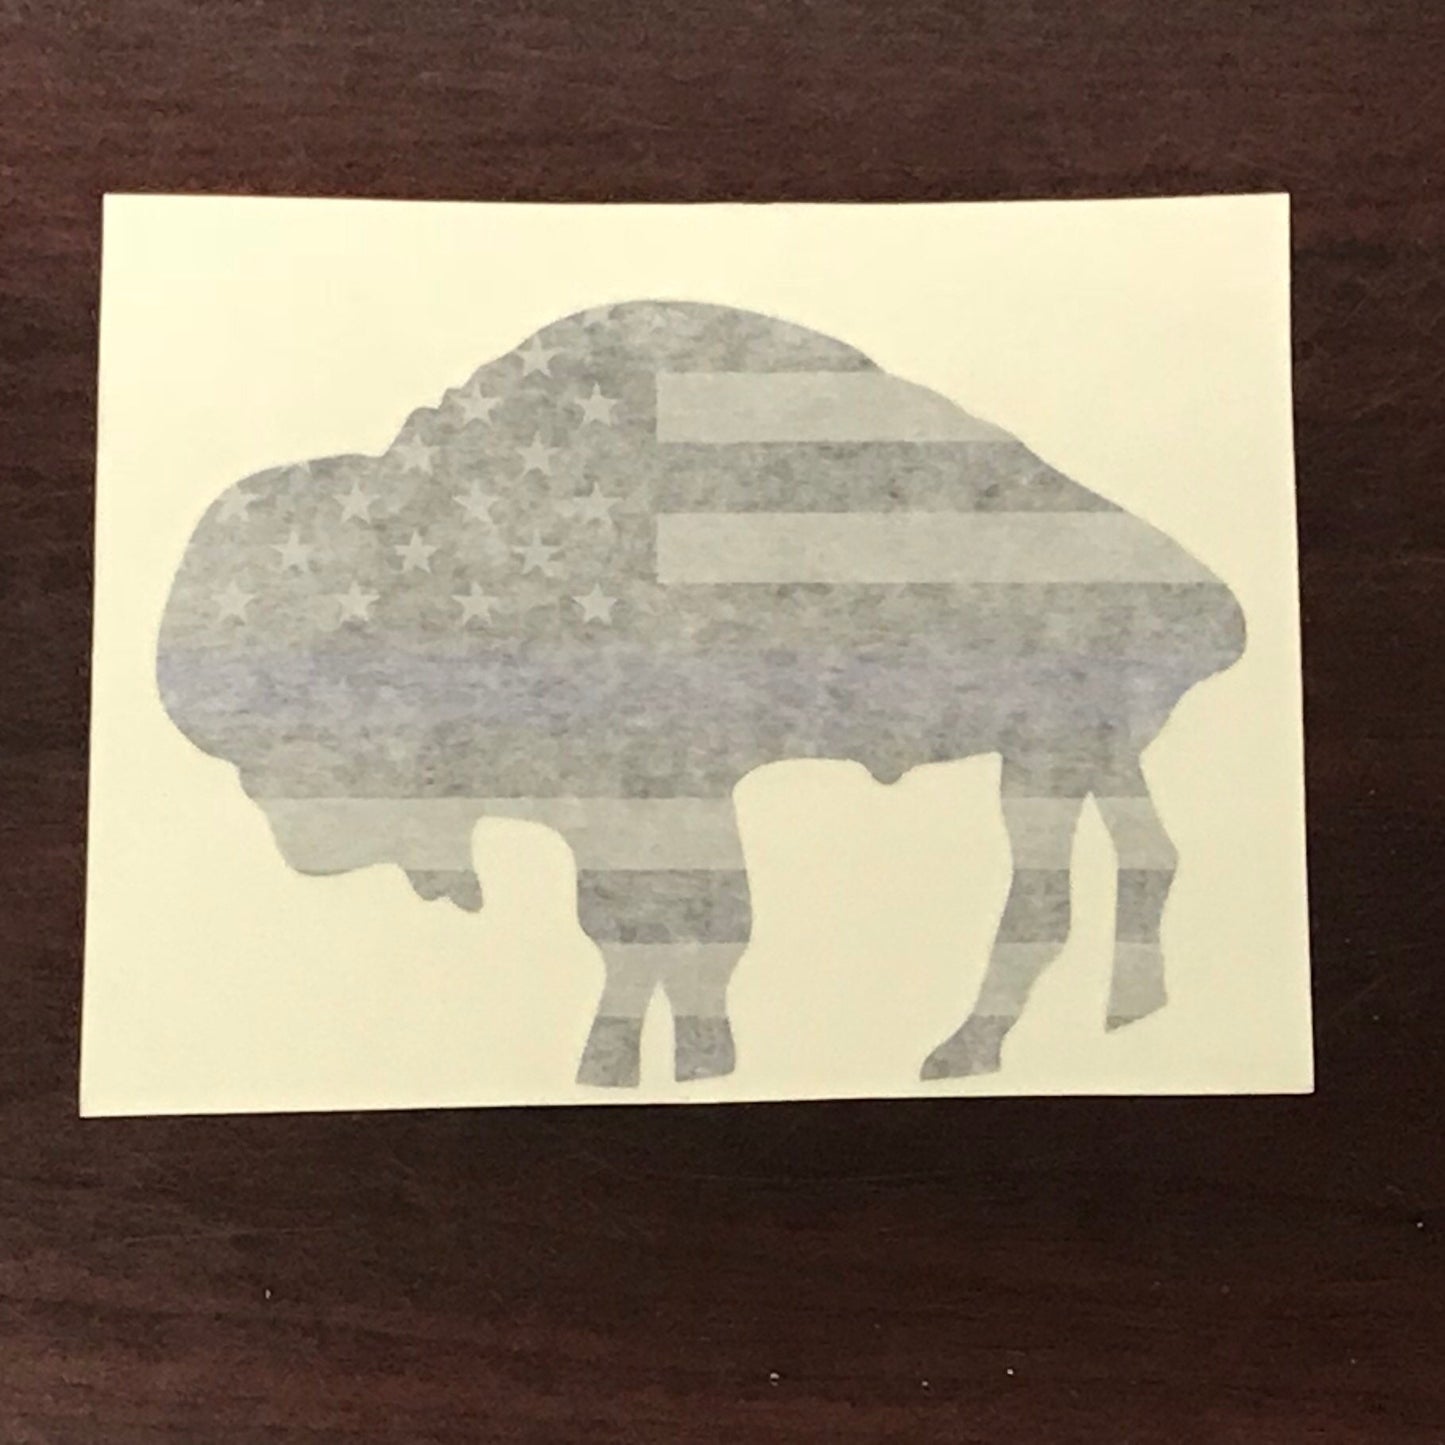 Buffalo NY Thin Blue Line Standing Bison Vinyl Decal Police Reflective Available USA American Flag